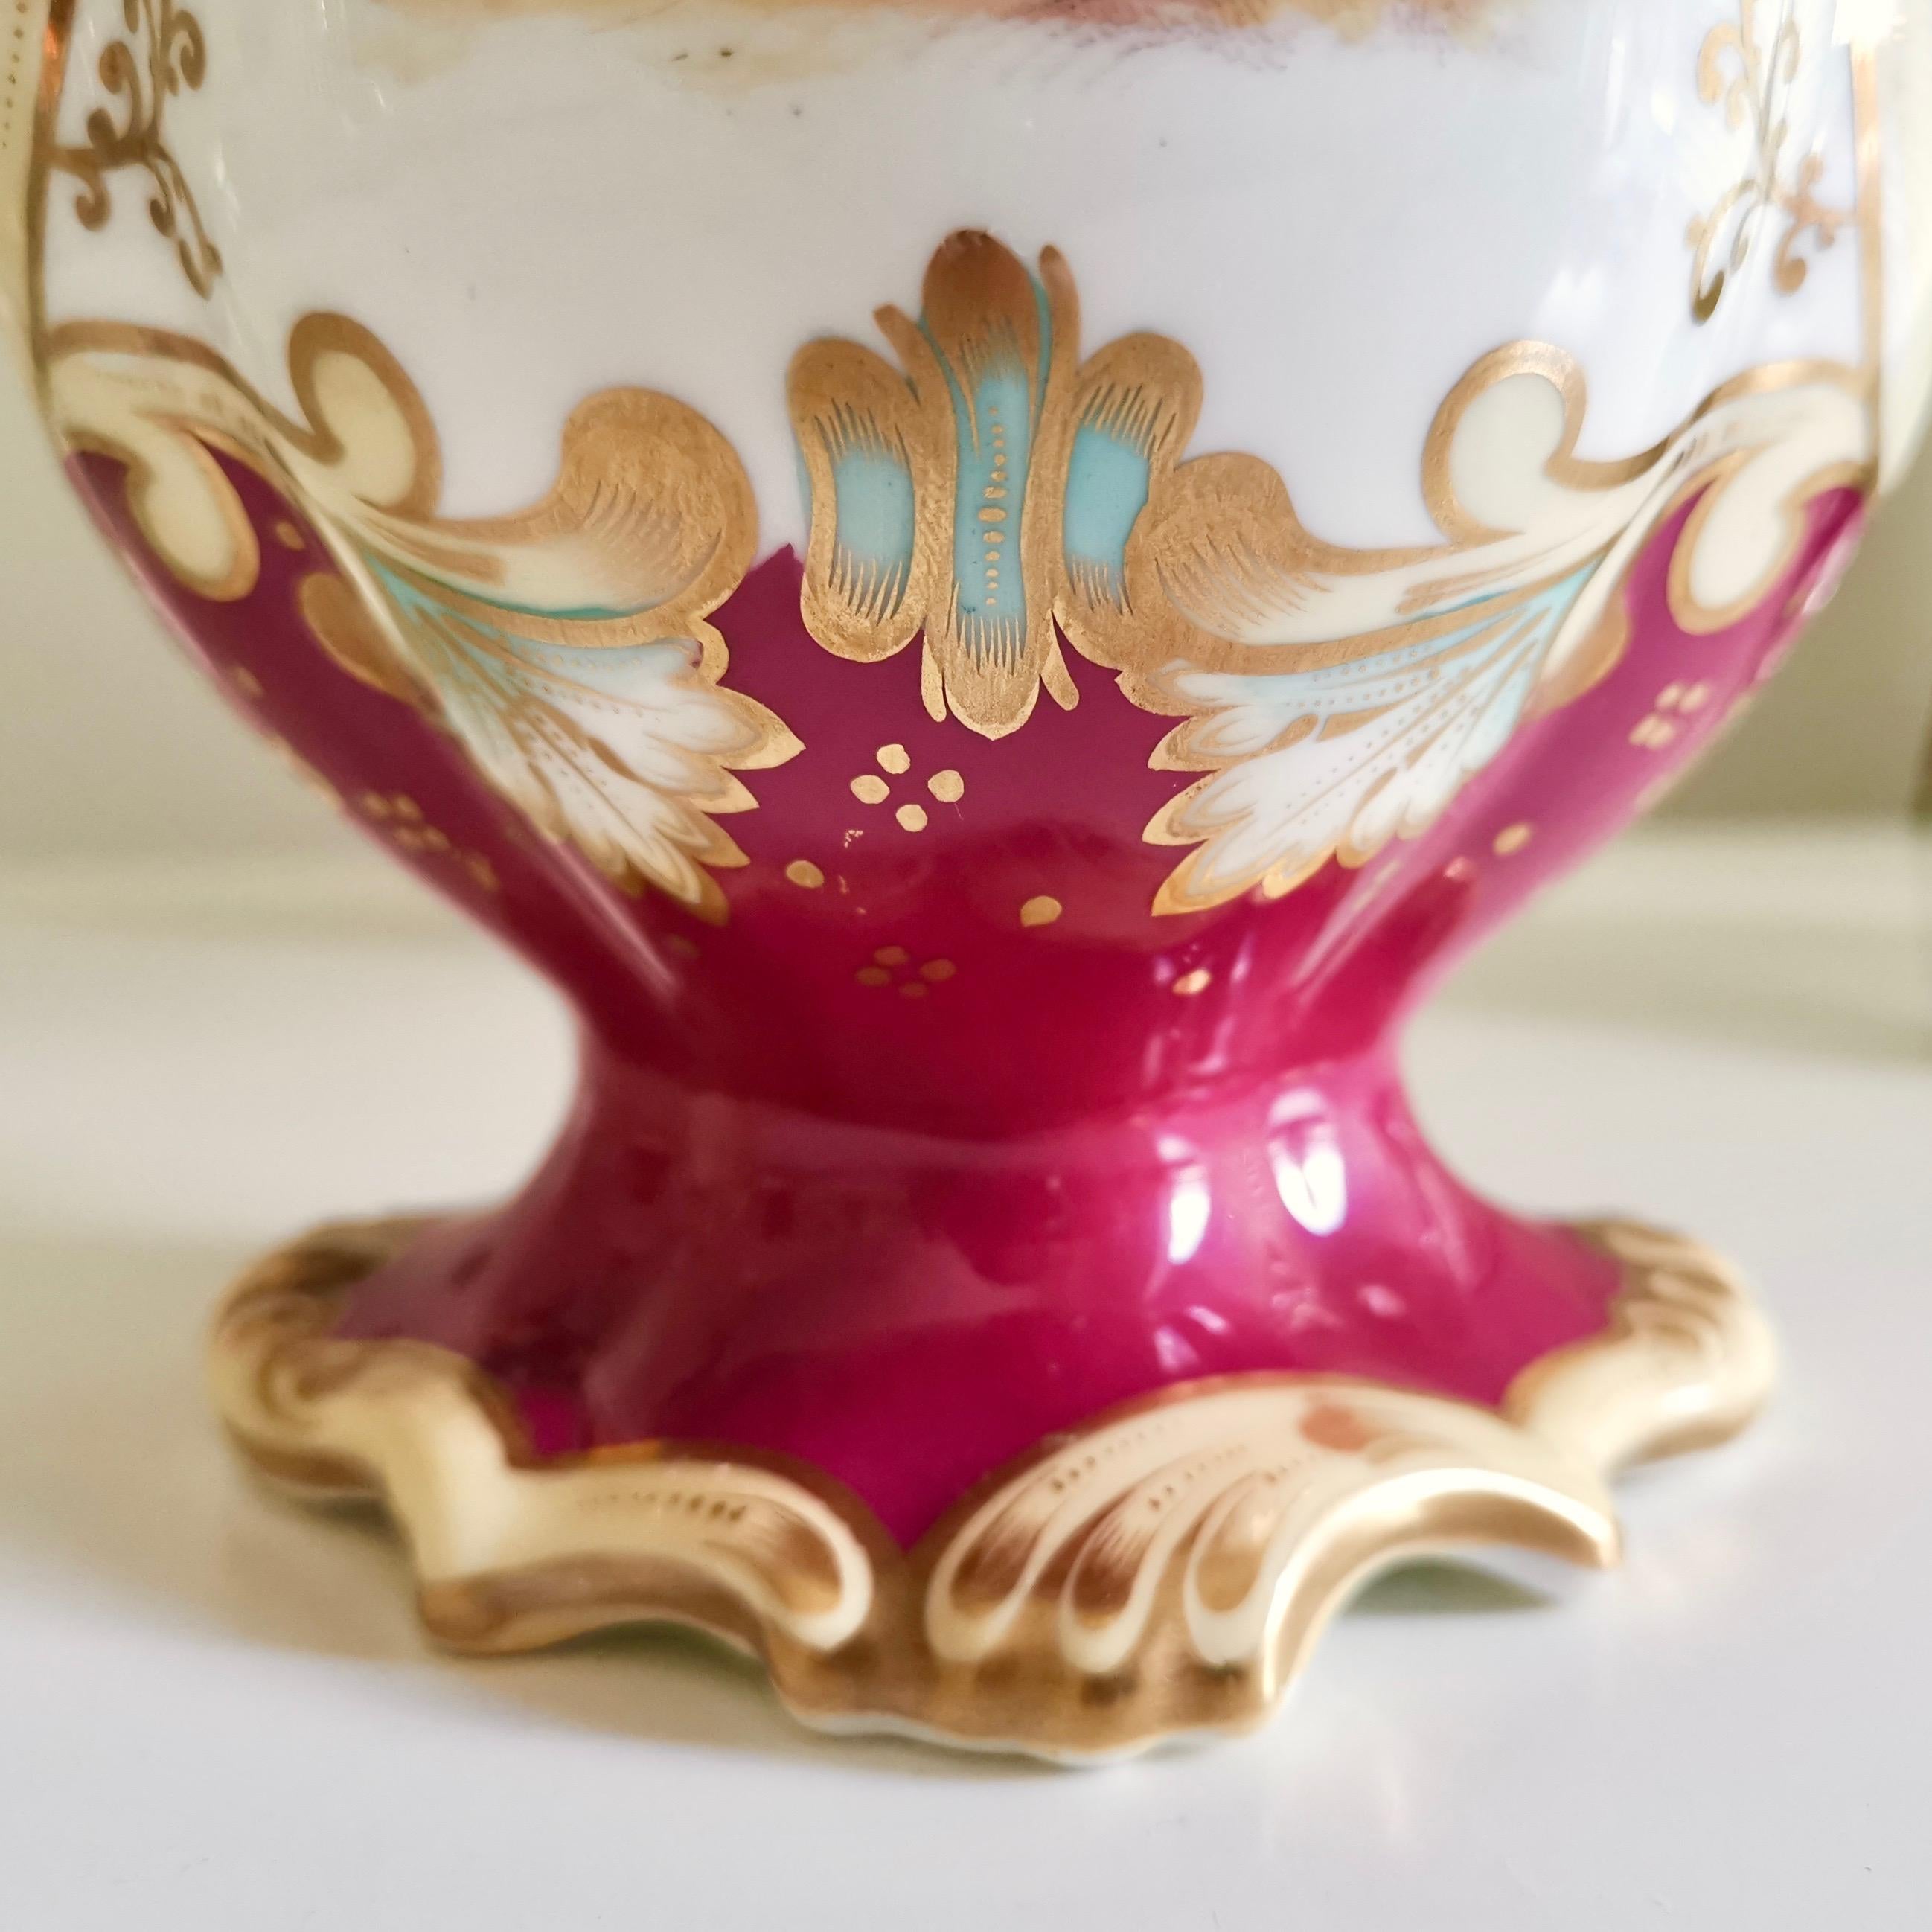 Mid-19th Century Samuel Alcock Porcelain Vase, Maroon with Landscapes, Rococo Revival, ca 1840 For Sale